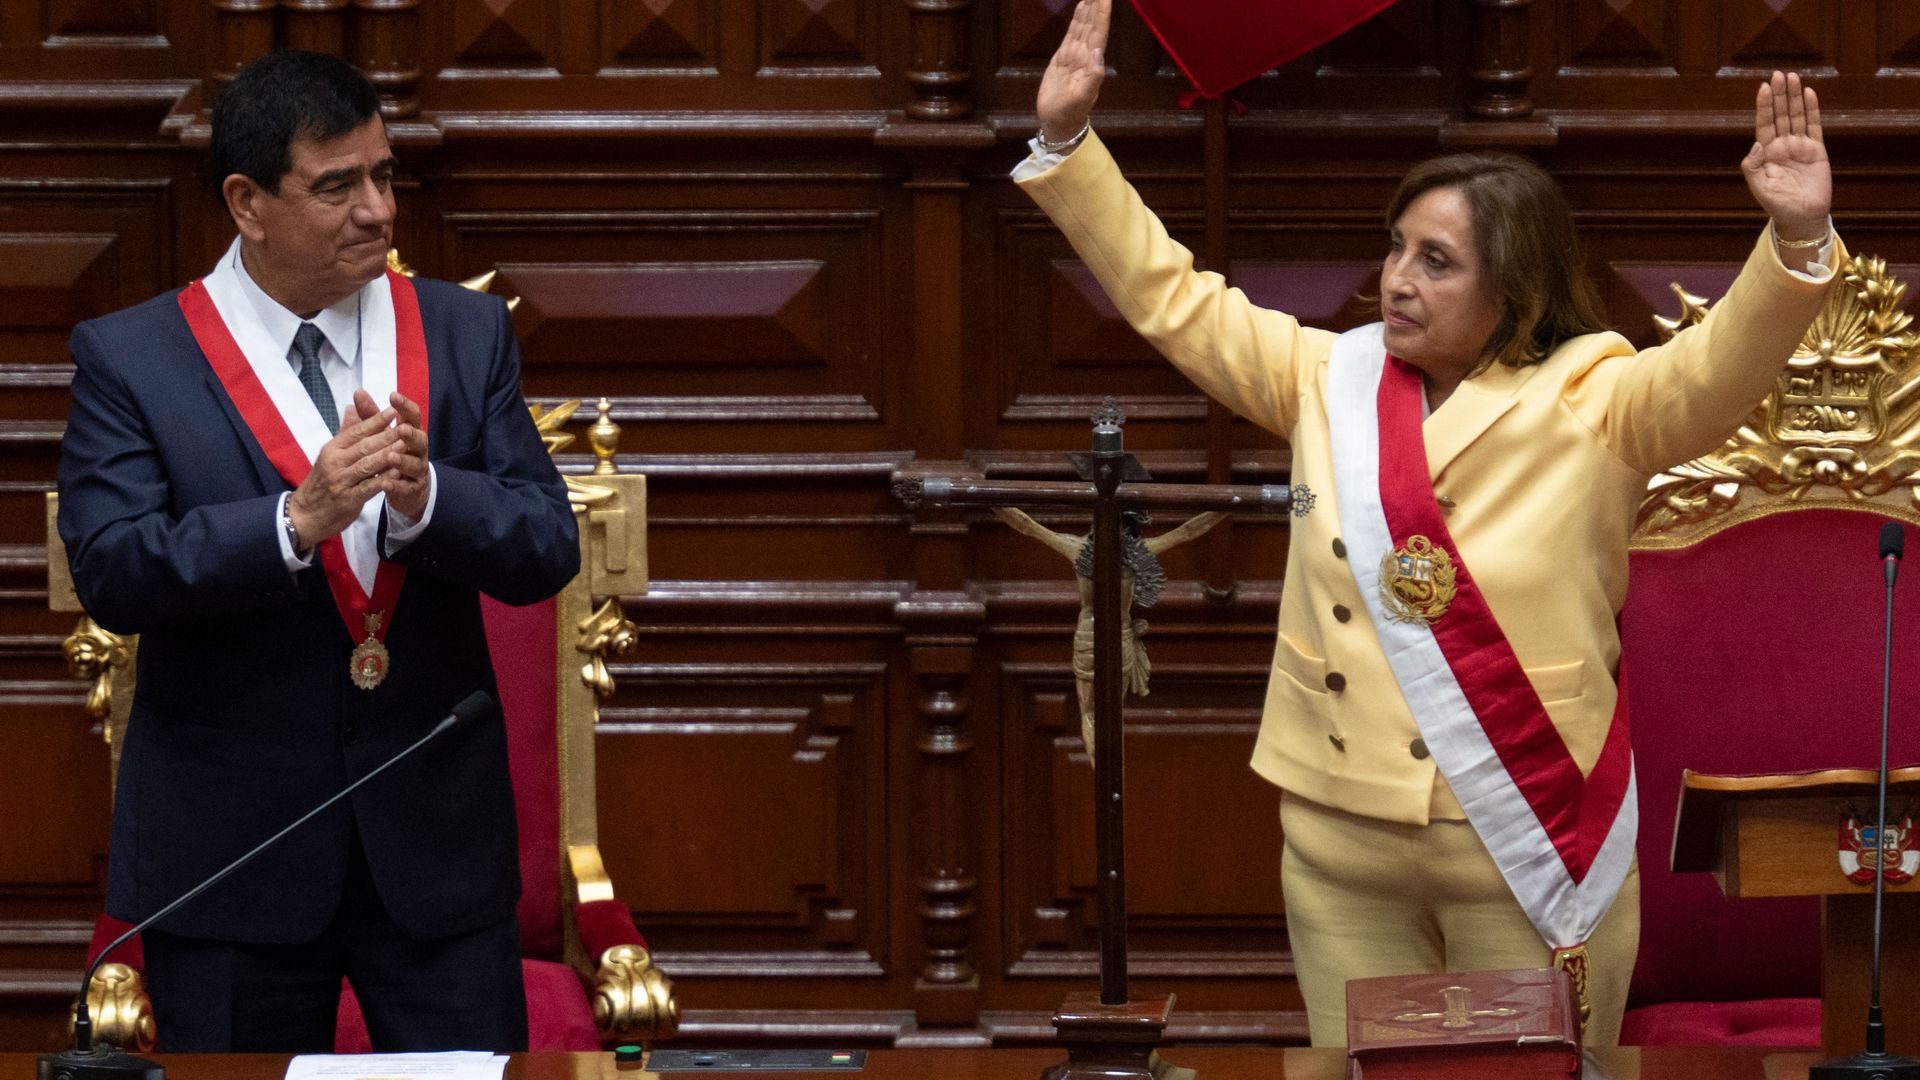 Peruvian President Dina Boluarte, in a yellow suit and a sash across her chest, raises both arms up in the air as she's sworn in 